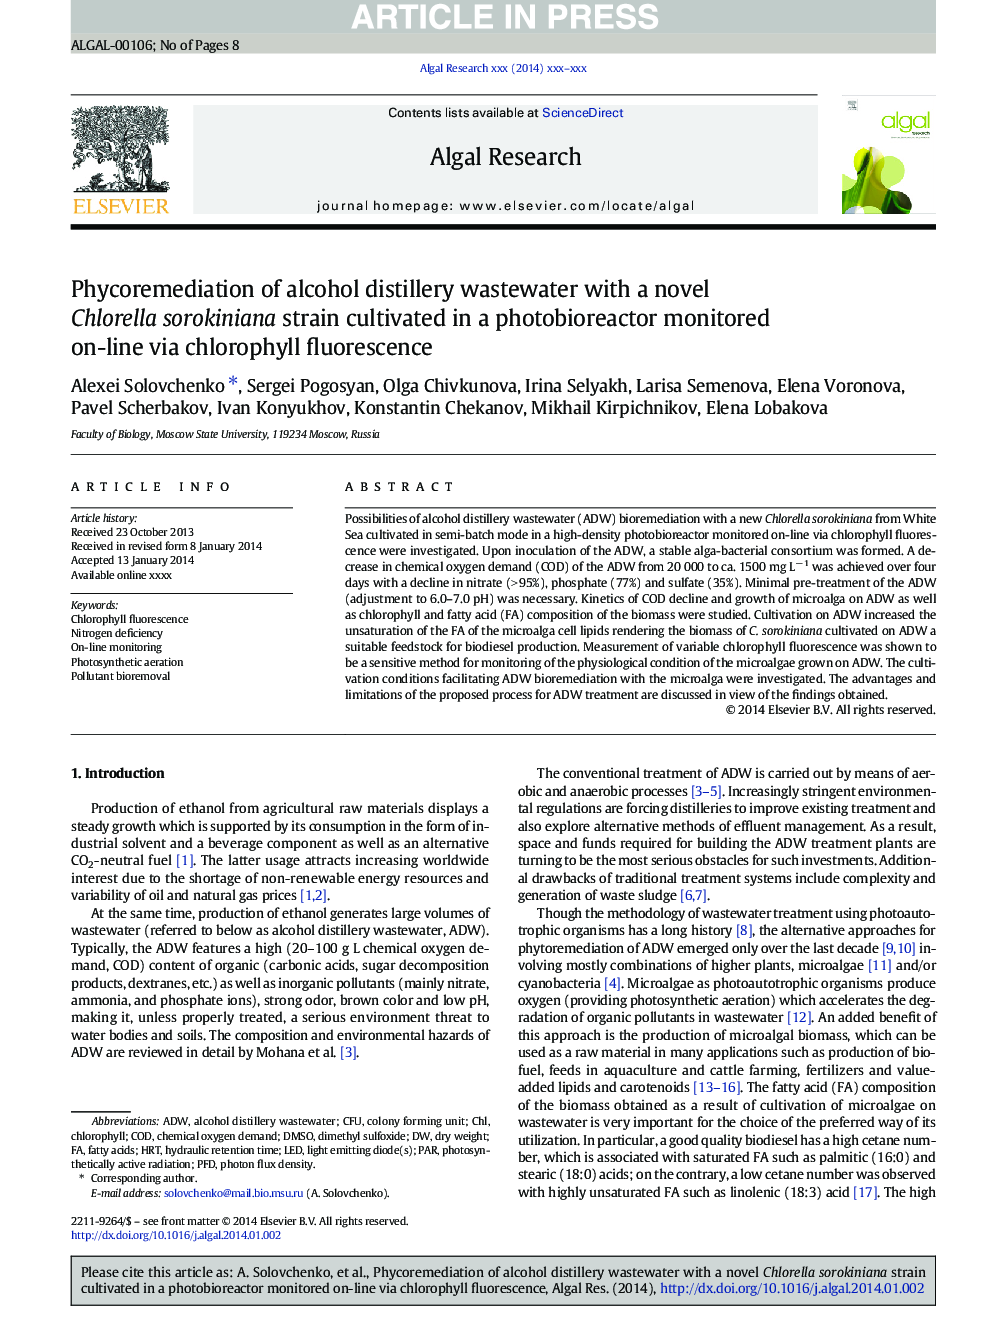 Phycoremediation of alcohol distillery wastewater with a novel Chlorella sorokiniana strain cultivated in a photobioreactor monitored on-line via chlorophyll fluorescence